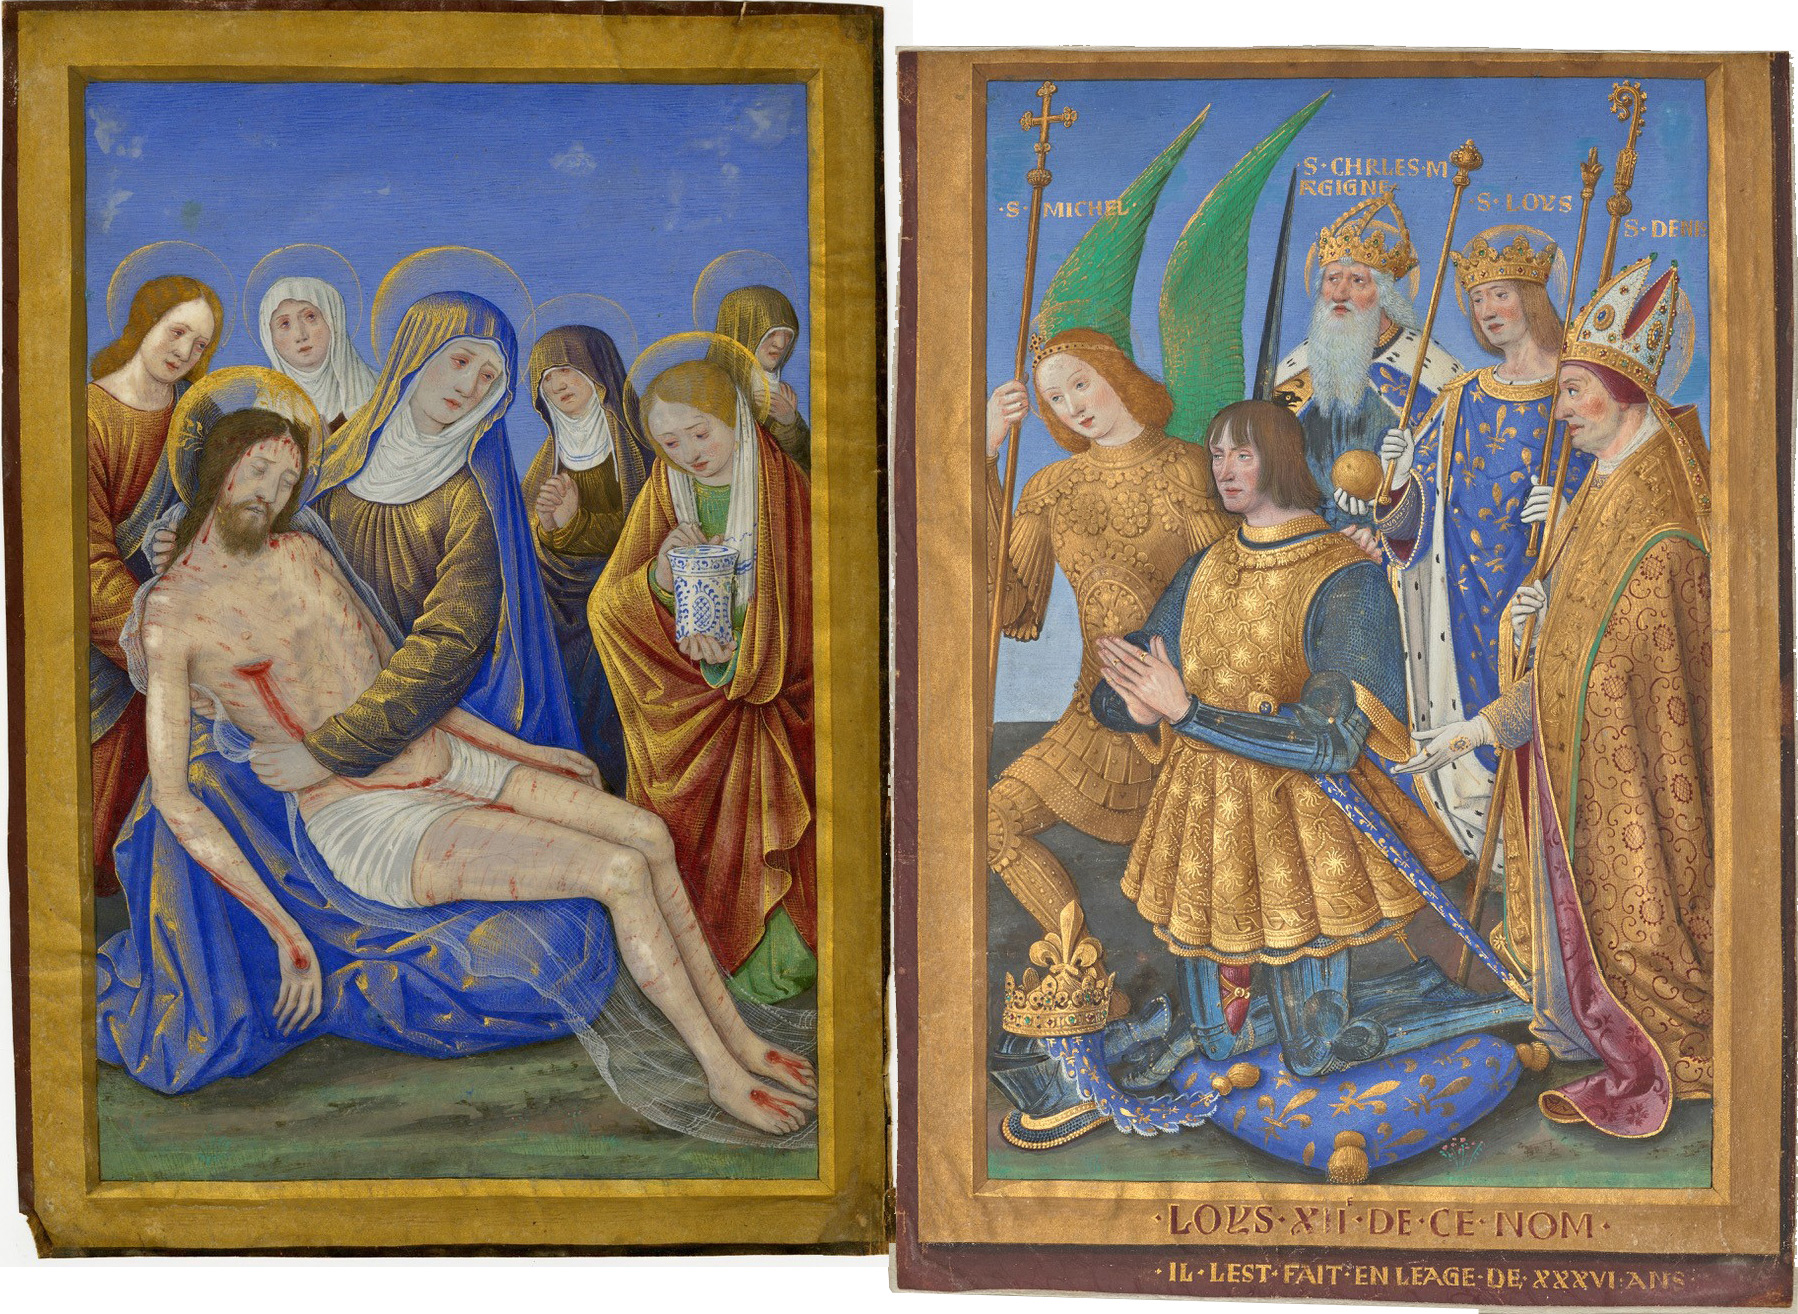 Two panels: Left: Lamentation of Christ with the Virgin Mary, the Holy Women, and Saint John. Right: Louis XII presented by saints and dignitaries